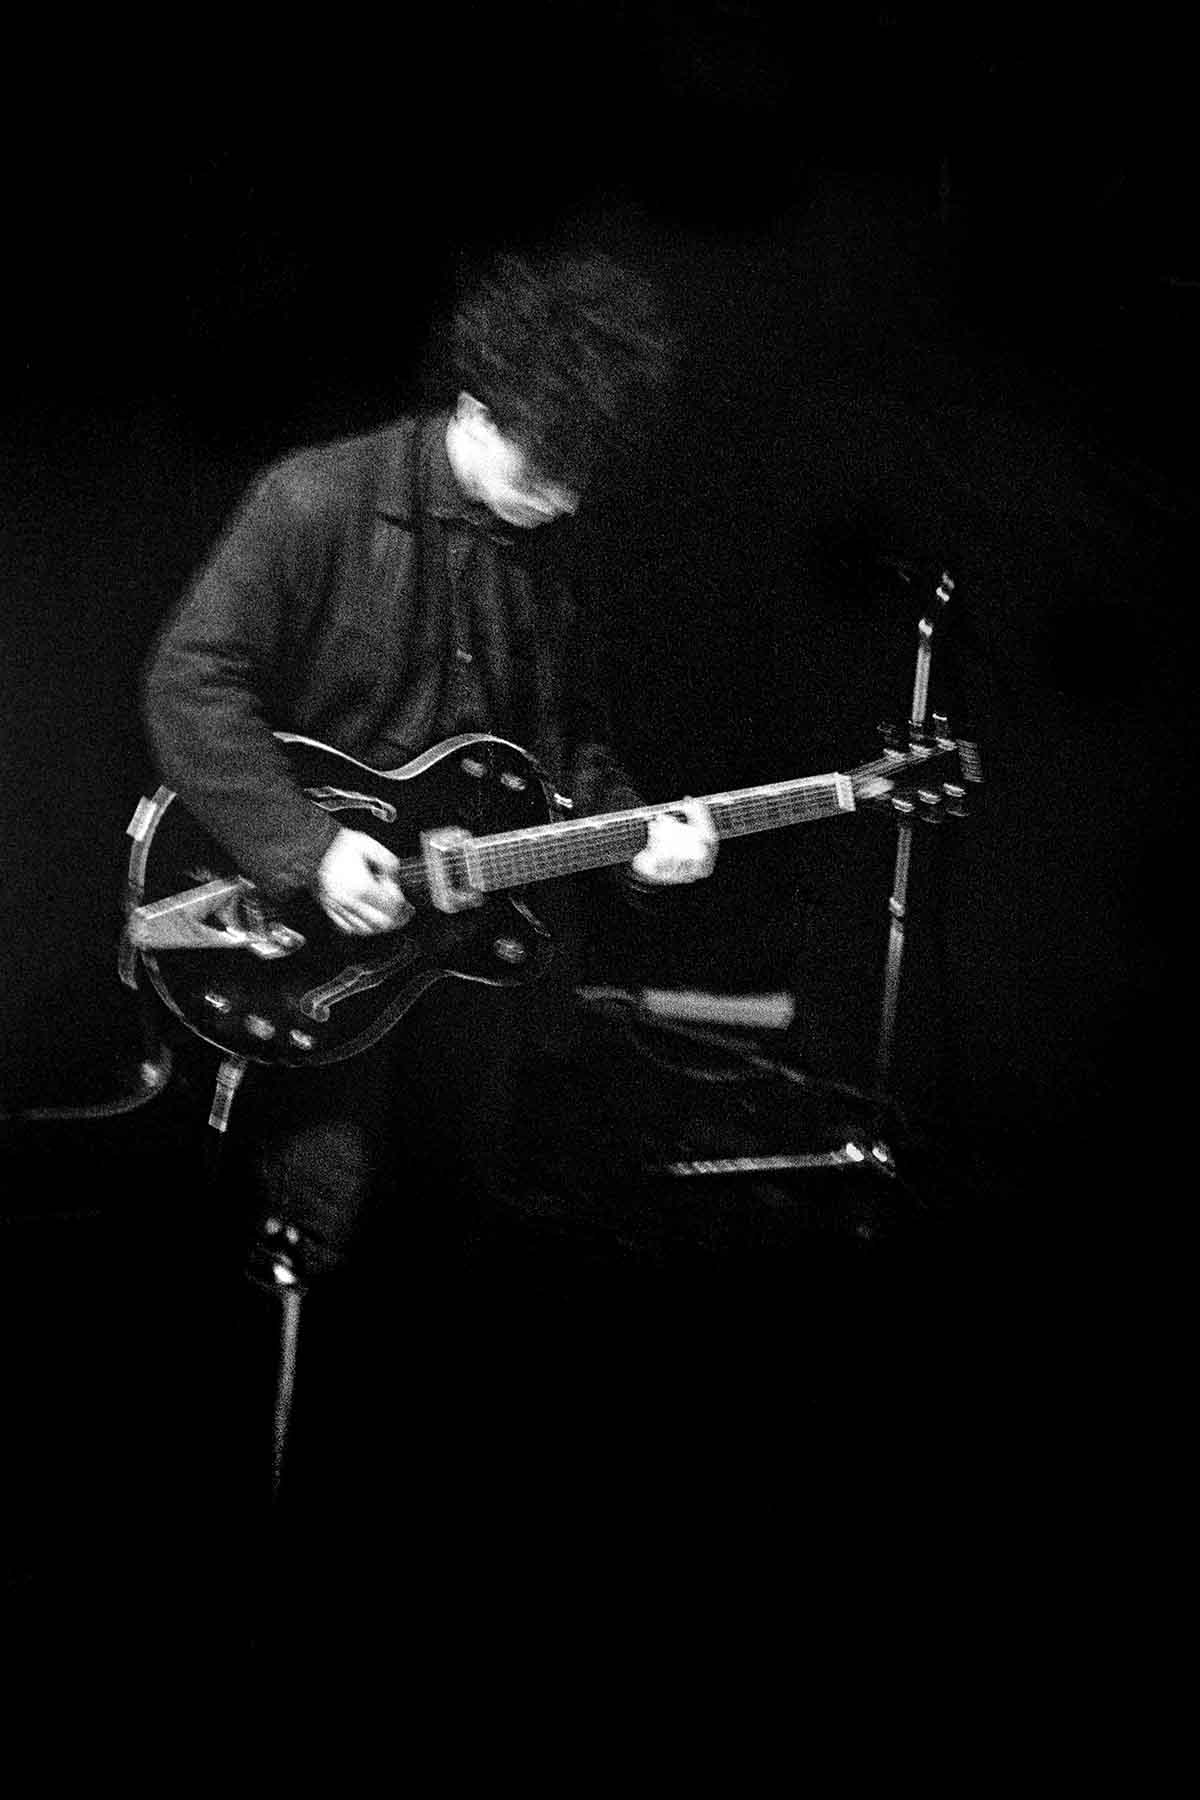 Live photos of experimental New Wave, Noise, Post-Punk, Industrial en Avantgarde bands inge-bekkers-photography-jesus-and-mary-chain-paradiso-live-alternative-bands-1941-fotografie